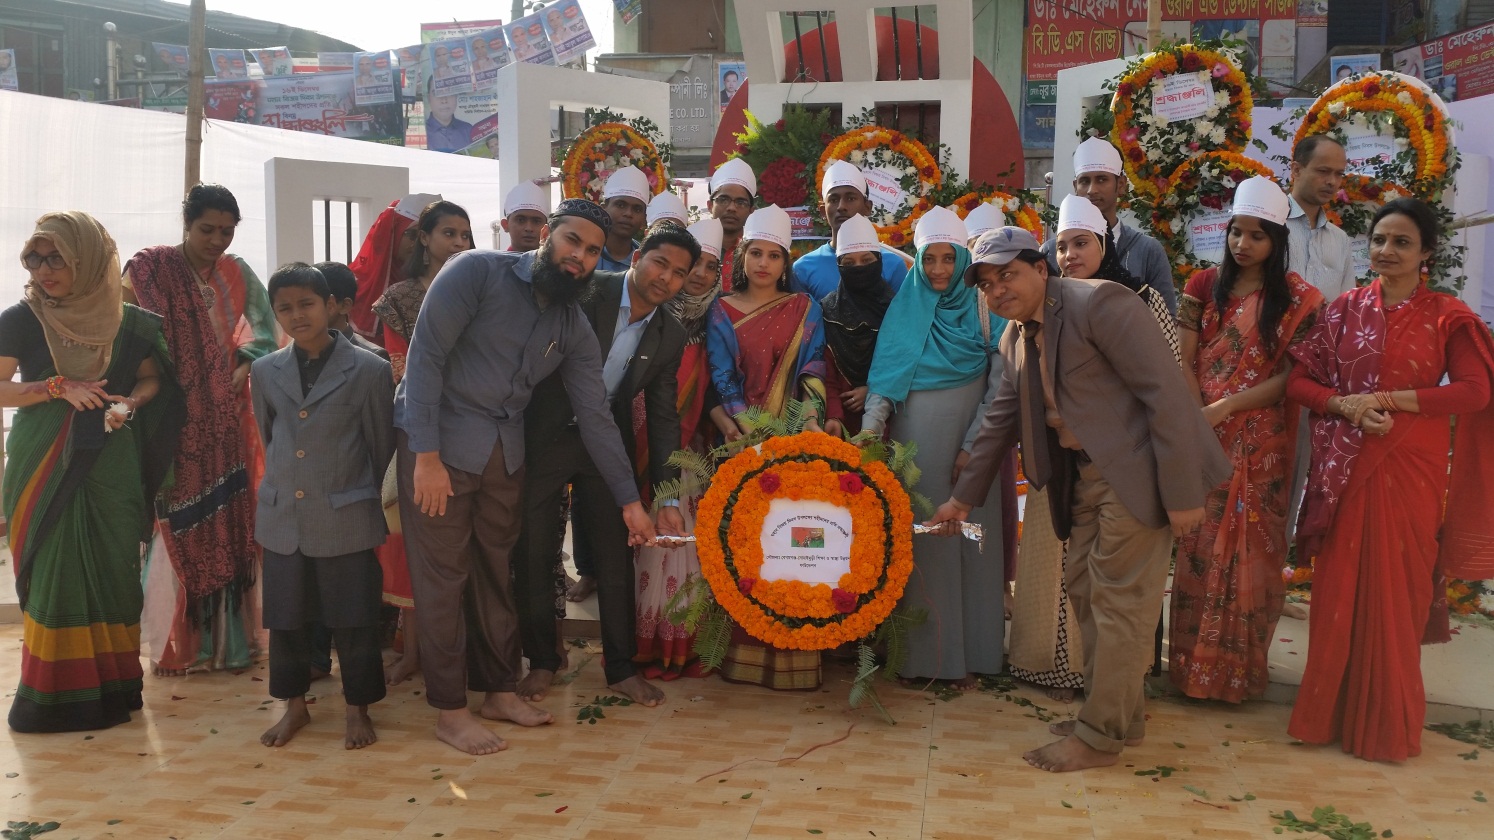 Md. Gias Uddin Mithu, Chairman, Begumganj-Sonaimuri Education and Health Development Foundation, laid a wreath at the Chaumuhani Central Shaheed Minar in memory of the martyrs on different national days.